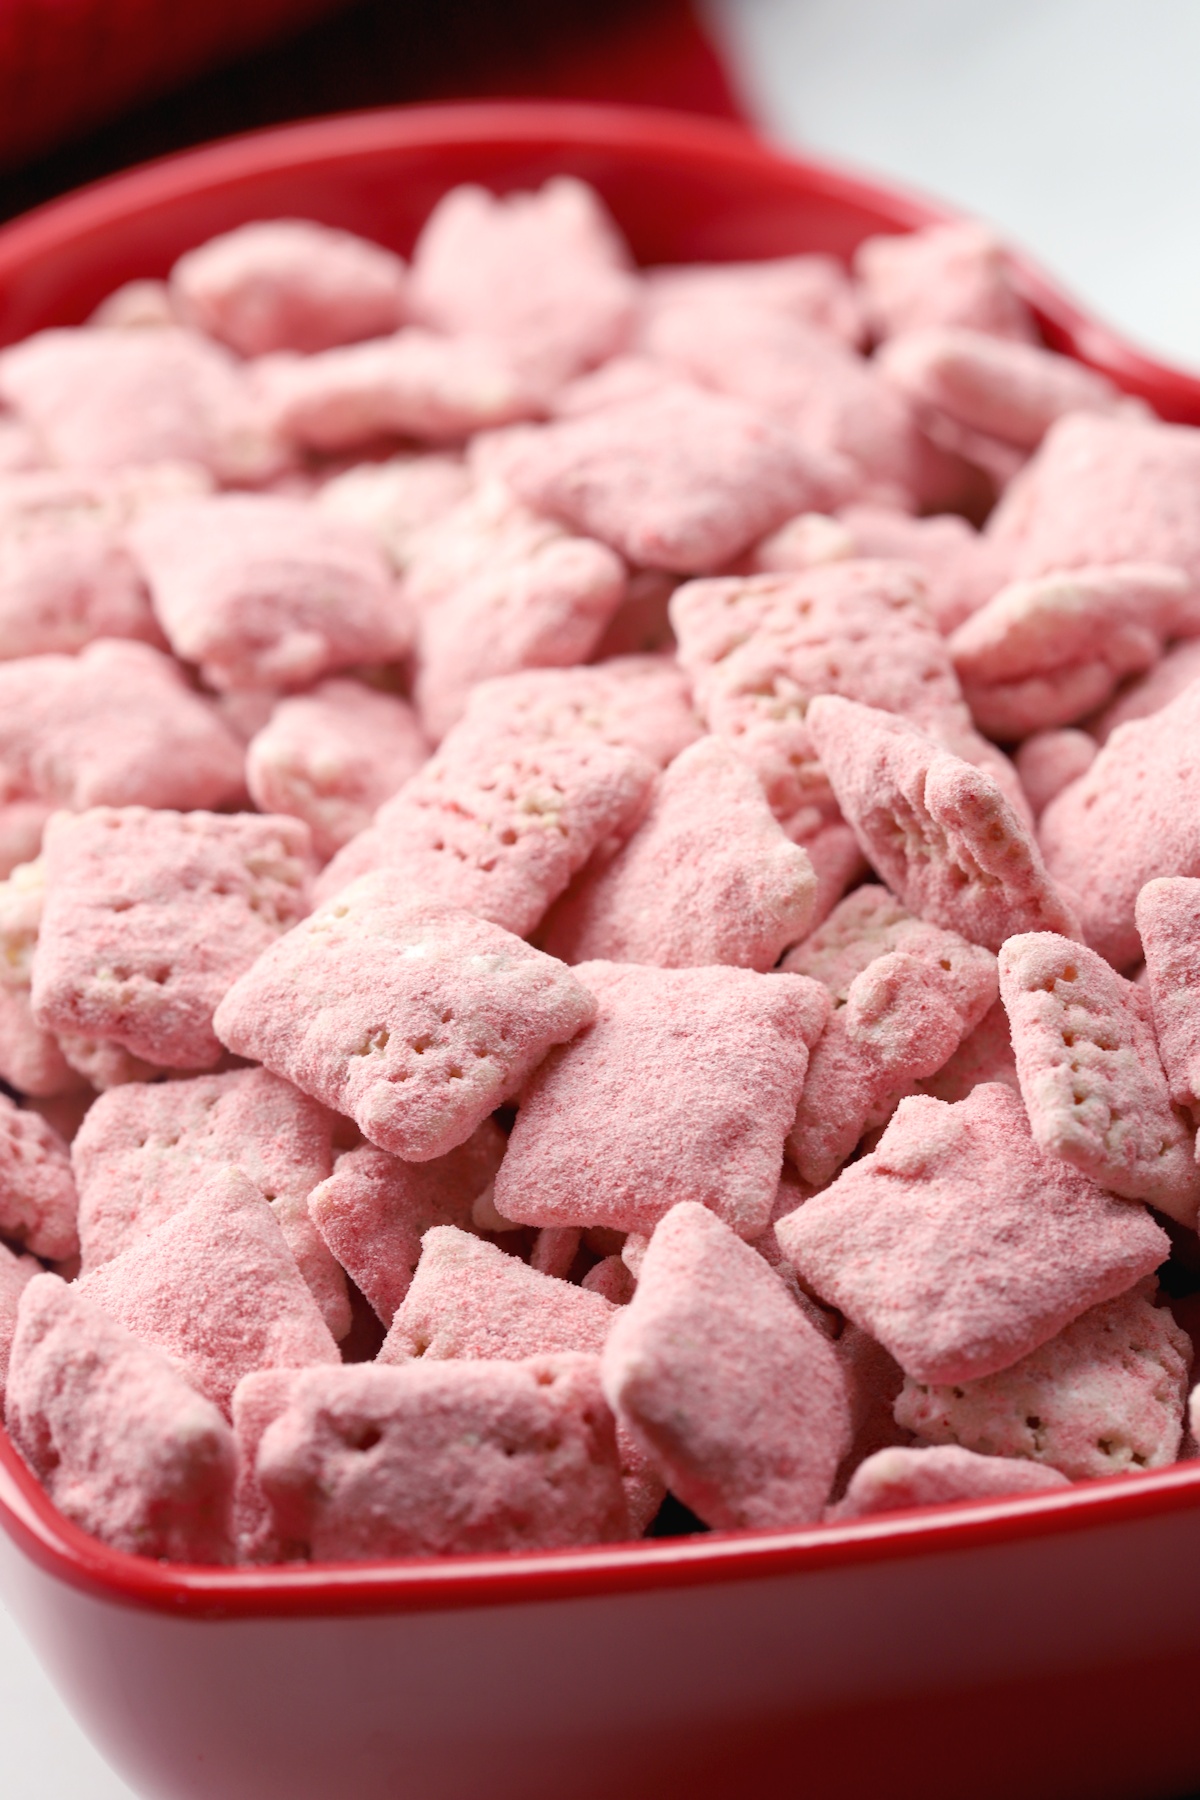 Strawberry Puppy Chow Snack Mix The Toasty Kitchen,Portable Gas Grills Amazon